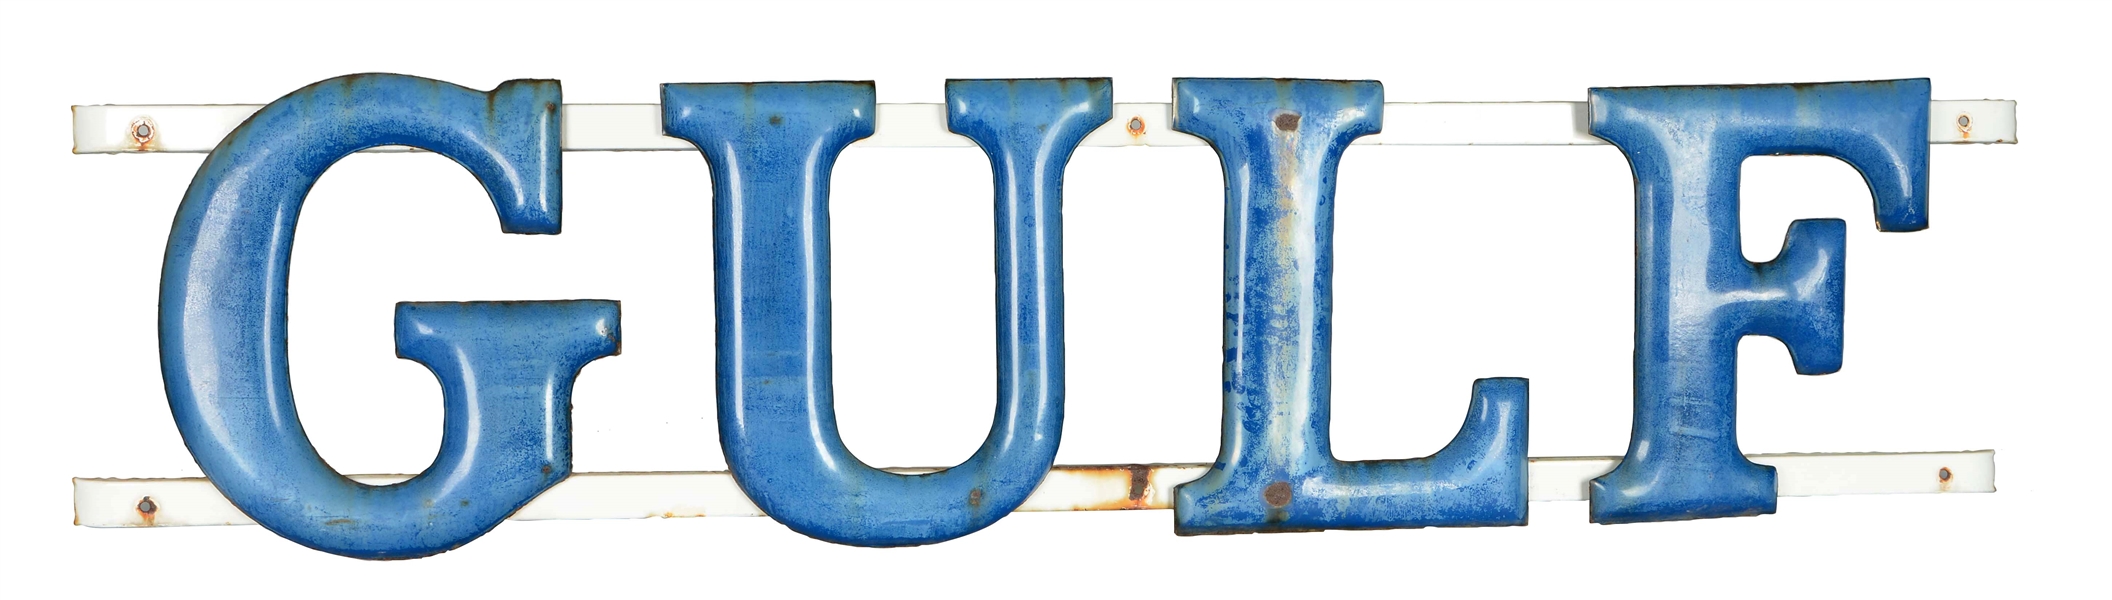 GULF PORCELAIN LETTERS. 